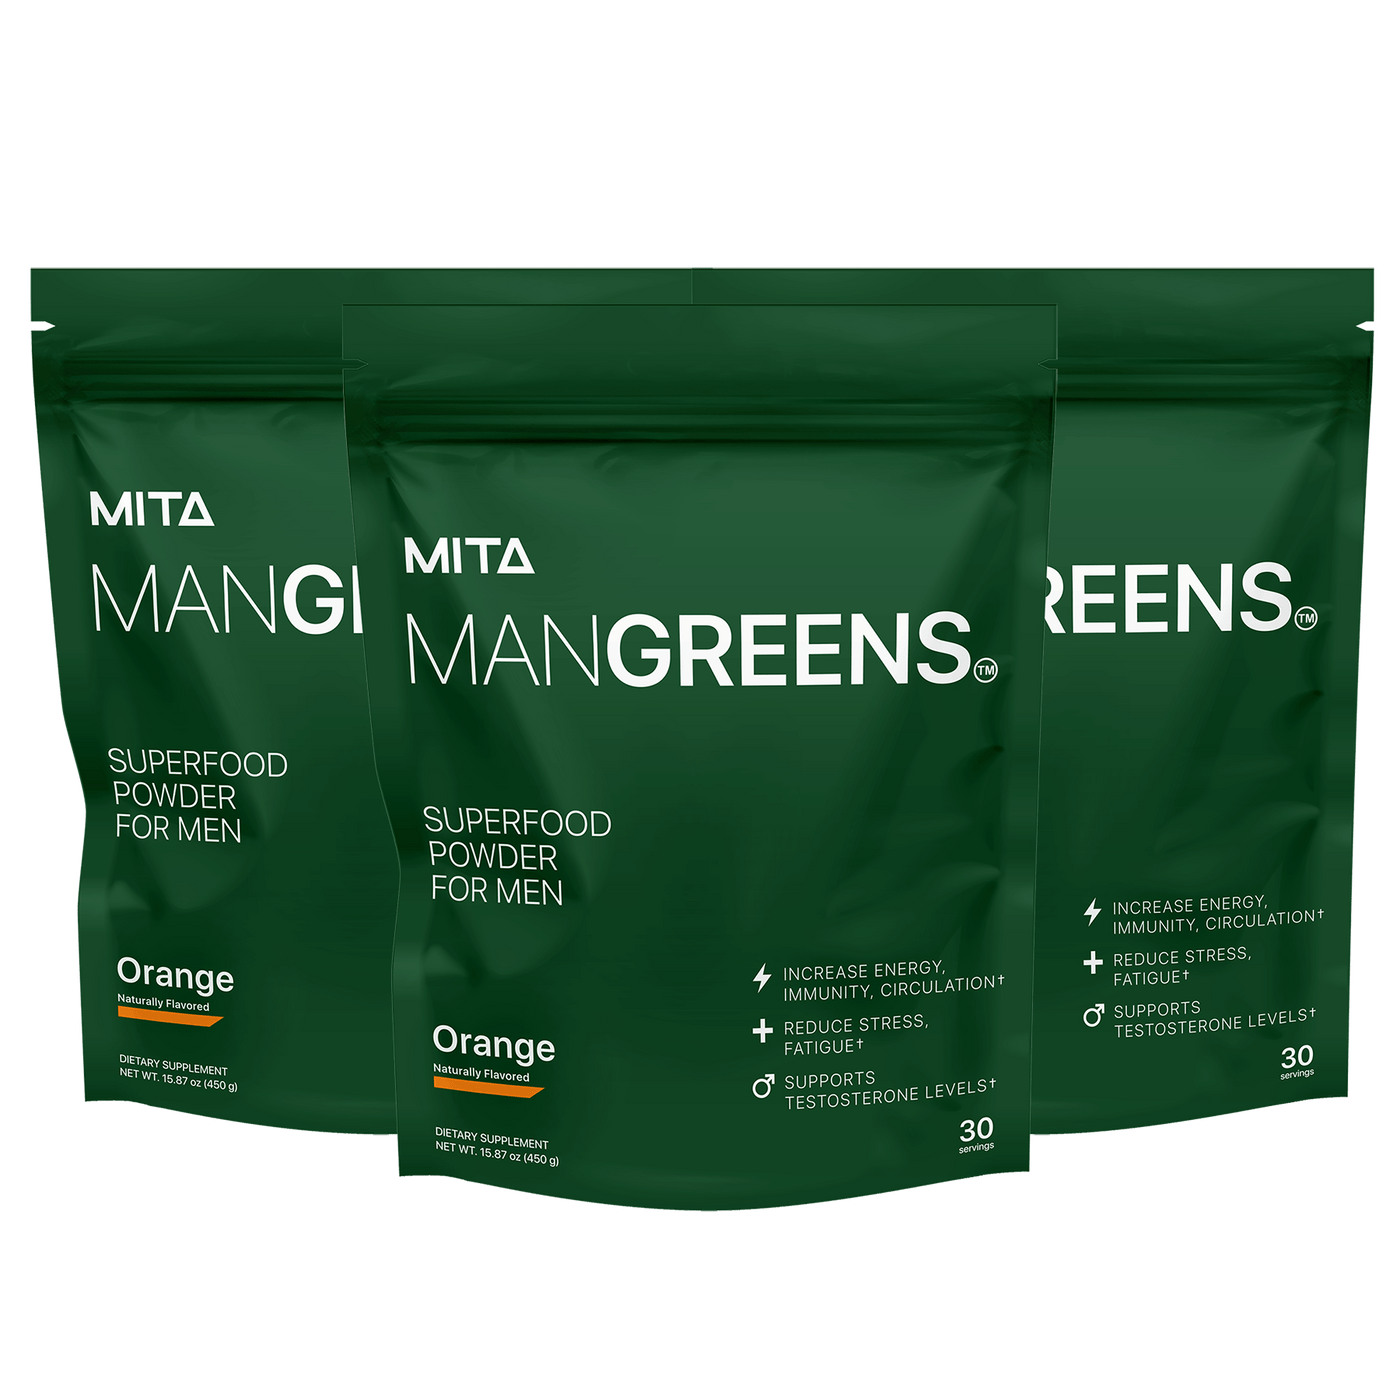 3 Bags of Man Greens (One-Time Offer)